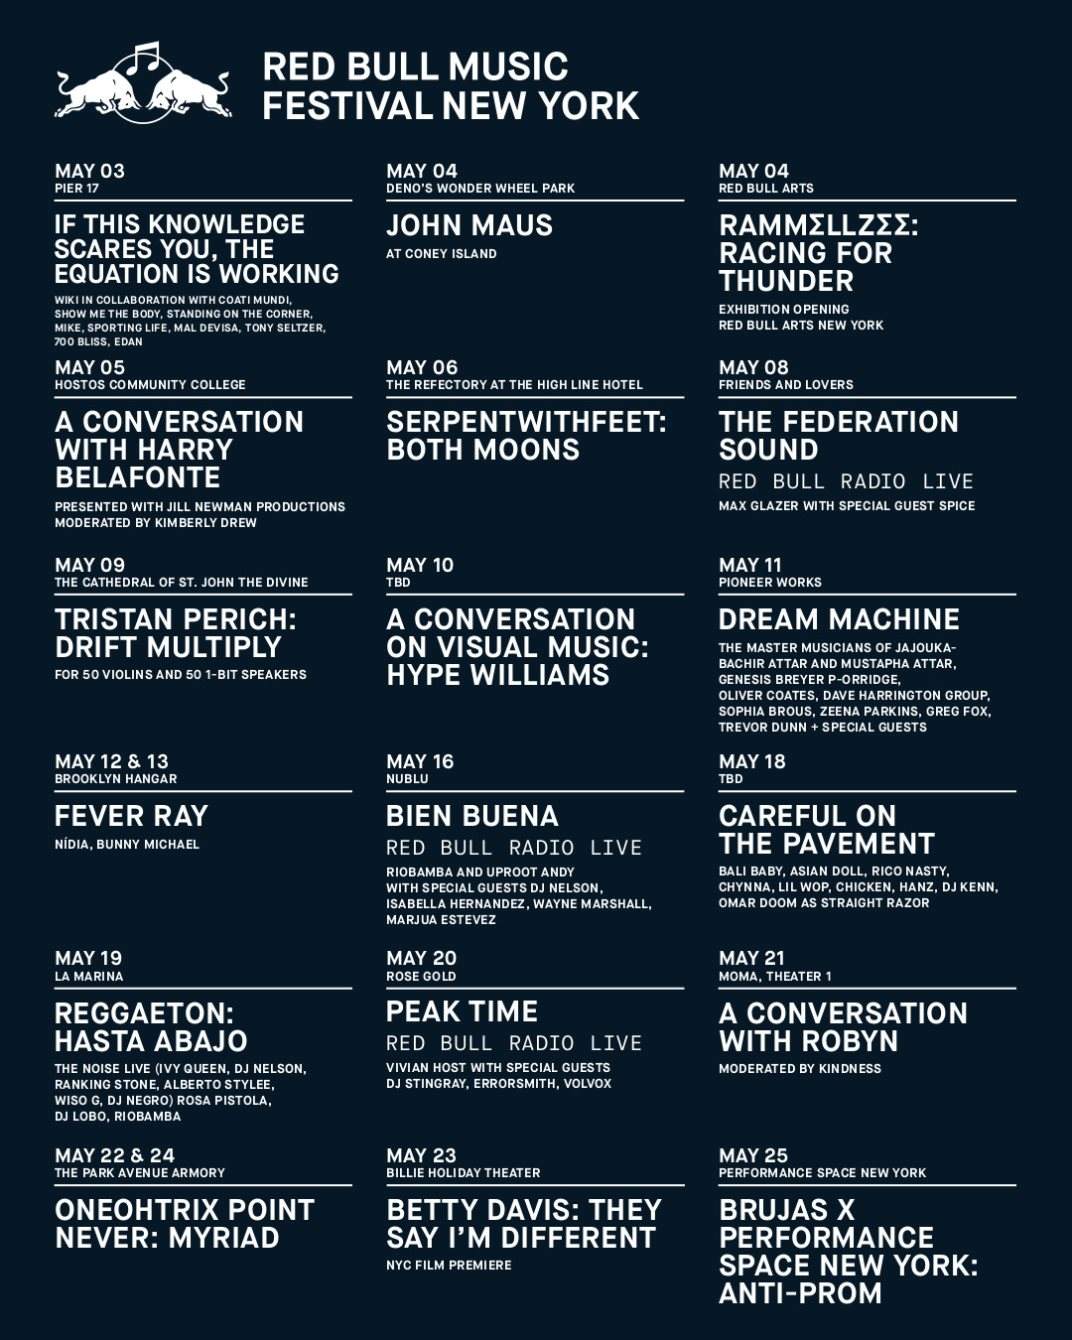 Red Bull Music Festival New York Pres. If This Knowledge Scares You The Equation Is Working - フライヤー裏